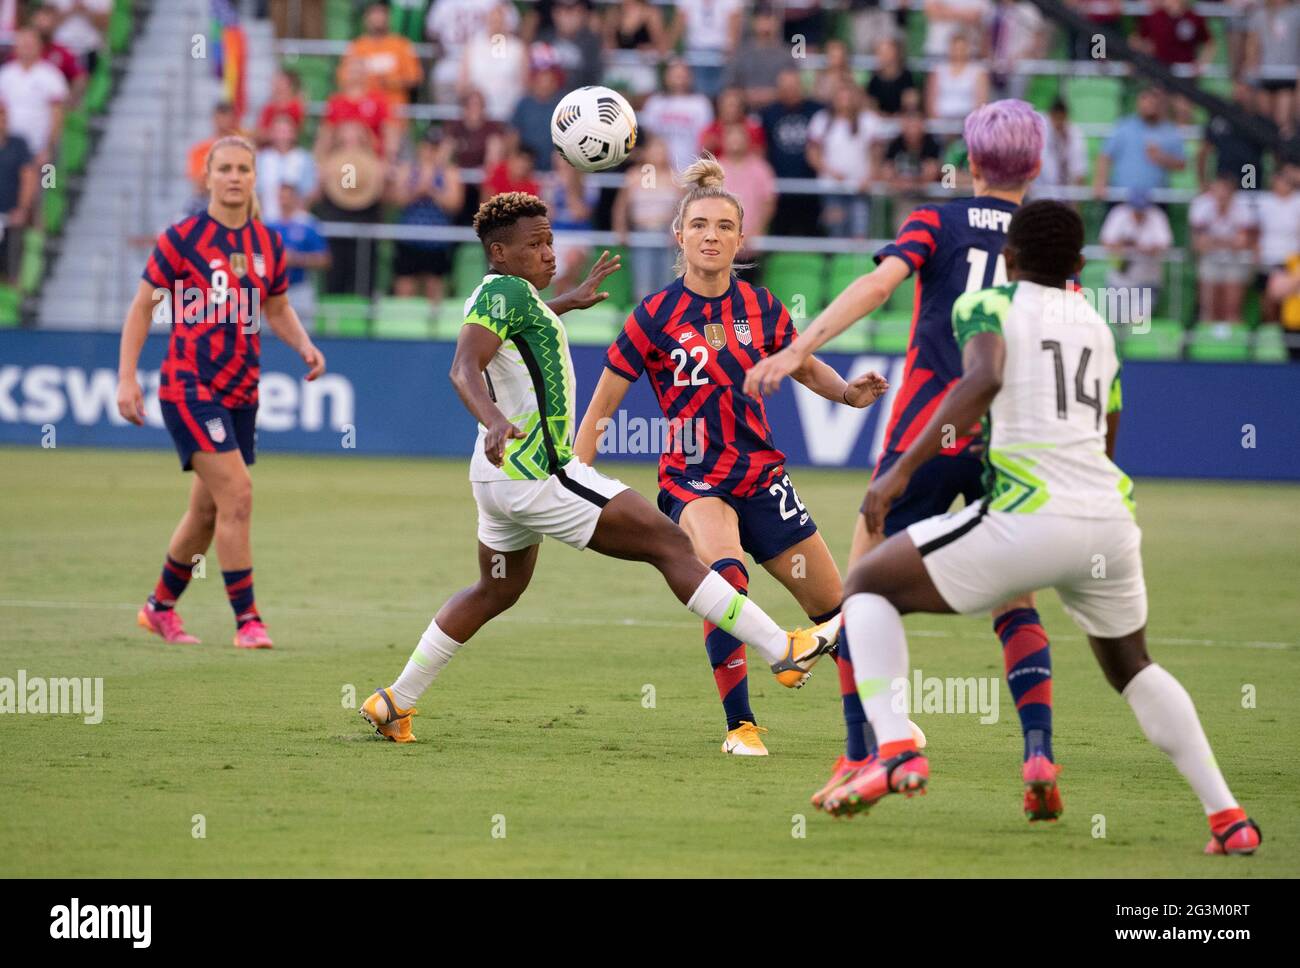 Austin, Texas, USA, June 16 2021: KRISTIE MEWIS (22) of Team USA threads between two Nigerian defenders in the first half as the US Women's National Team (USWNT) beats Nigeria, 2-0 in the inaugural match of Austin's new Q2 Stadium. The U.S. women's team, an Olympic favorite, is wrapping up a series of summer matches to prep for the Tokyo Games. At right is CHIDNMA OKEKE (14) of Nigeria. Credit: Bob Daemmrich/Alamy Live News Stock Photo